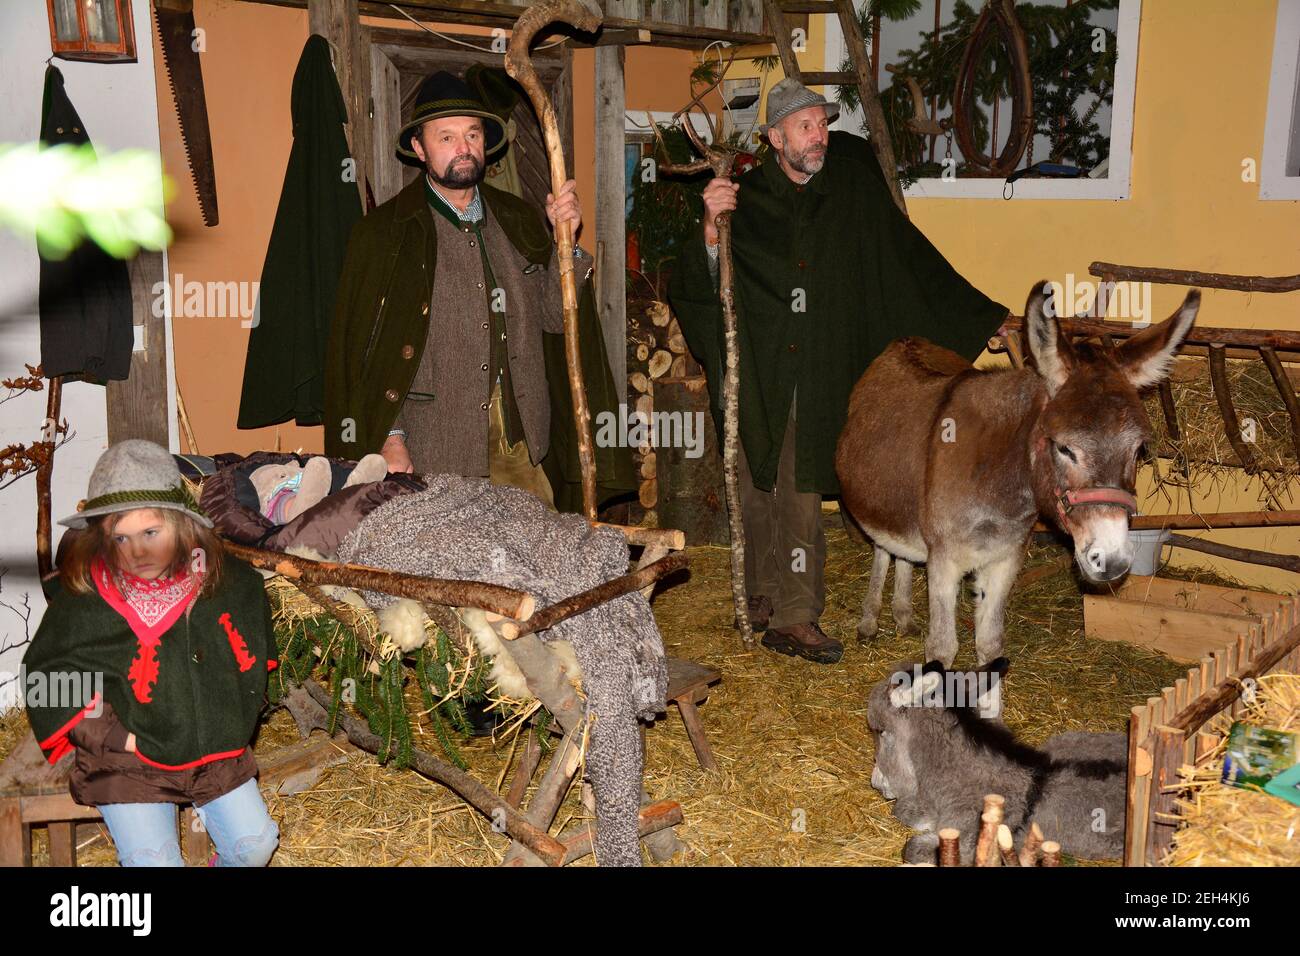 Rohr im Gebirge, Austria - December 14th 2014: Unidentified people with donkey performed a living crib in the rural village in Lower Austria Stock Photo